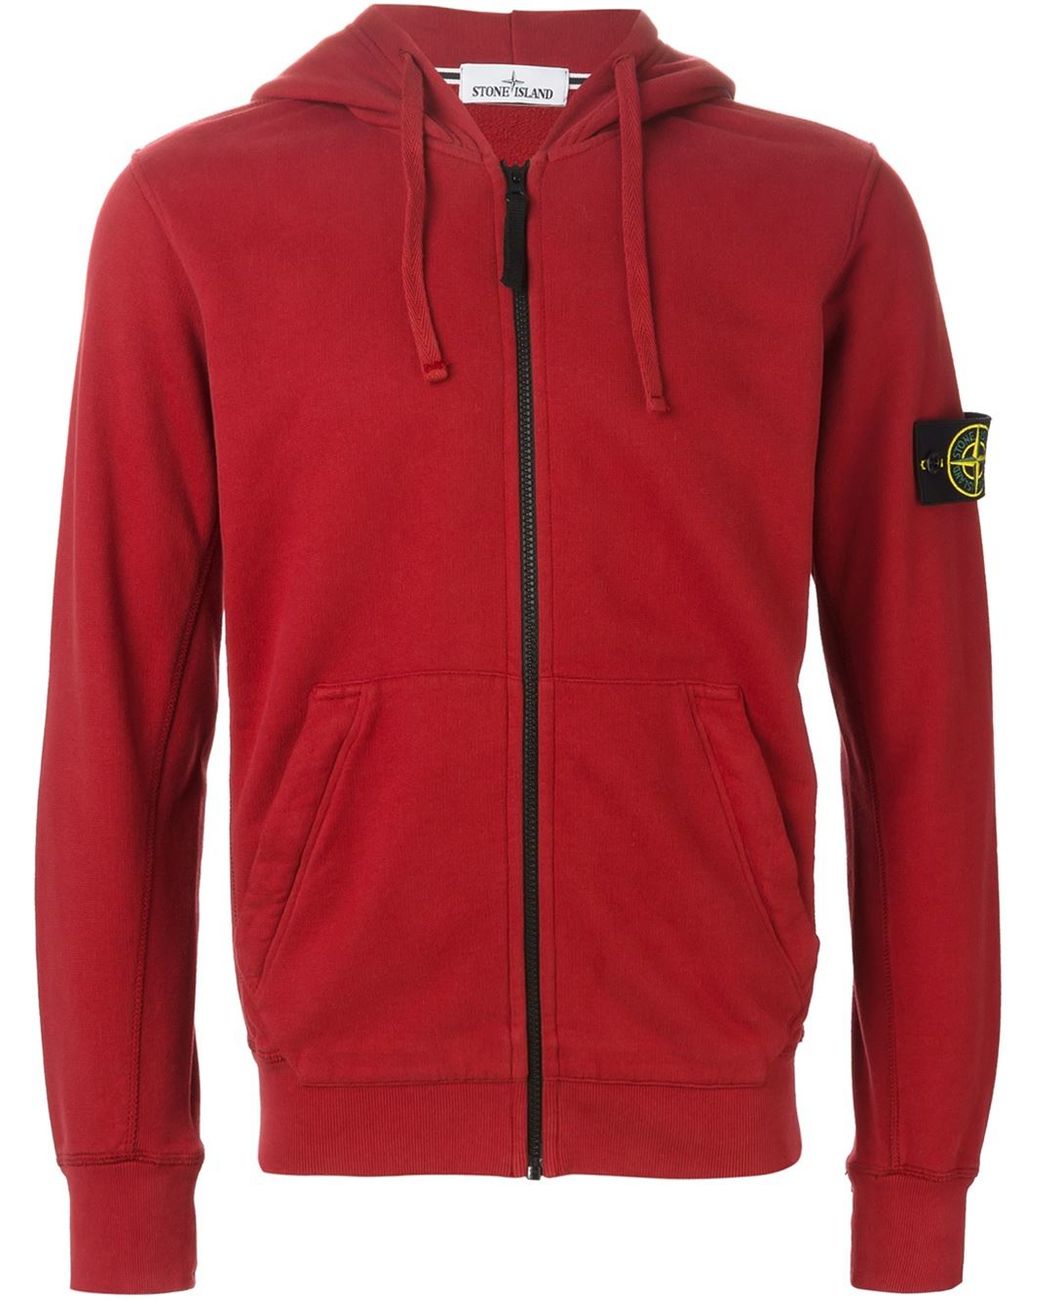 Stone Island Zipped Hoodie in Red for Men | Lyst UK